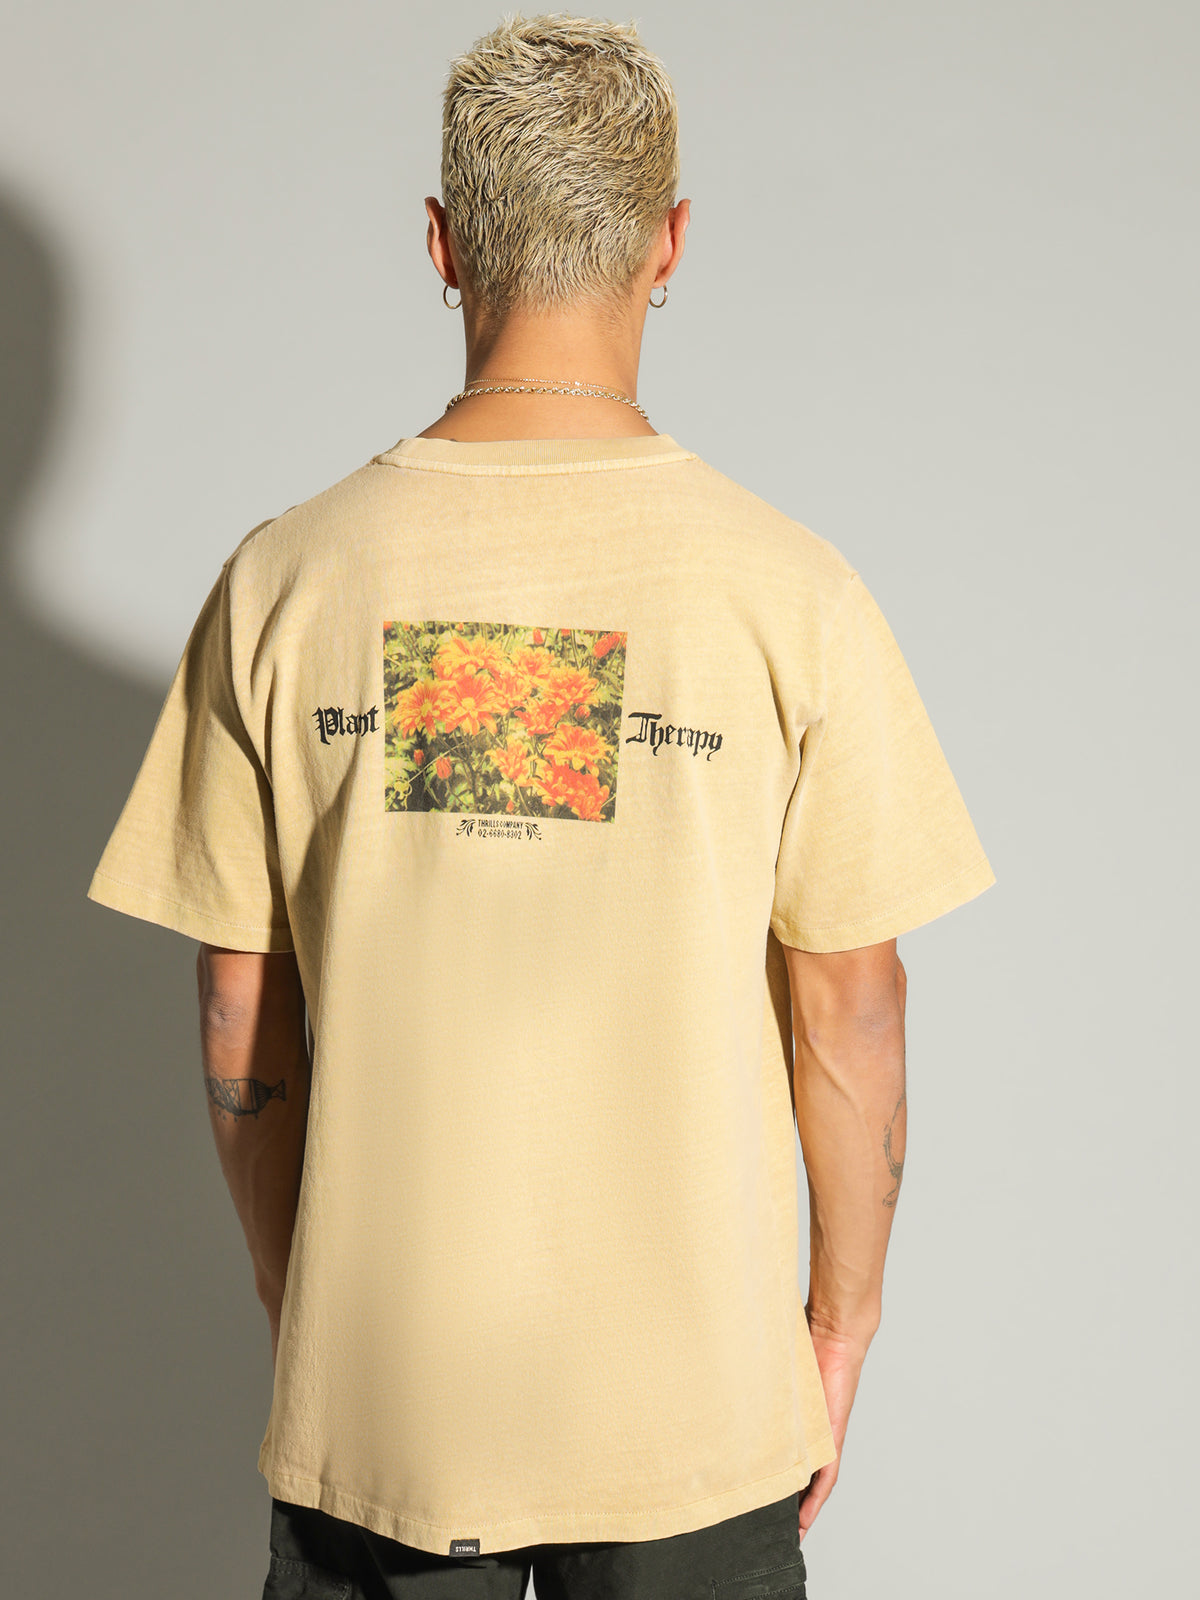 Plant Therapy Merch Fit T-Shirt in Incense